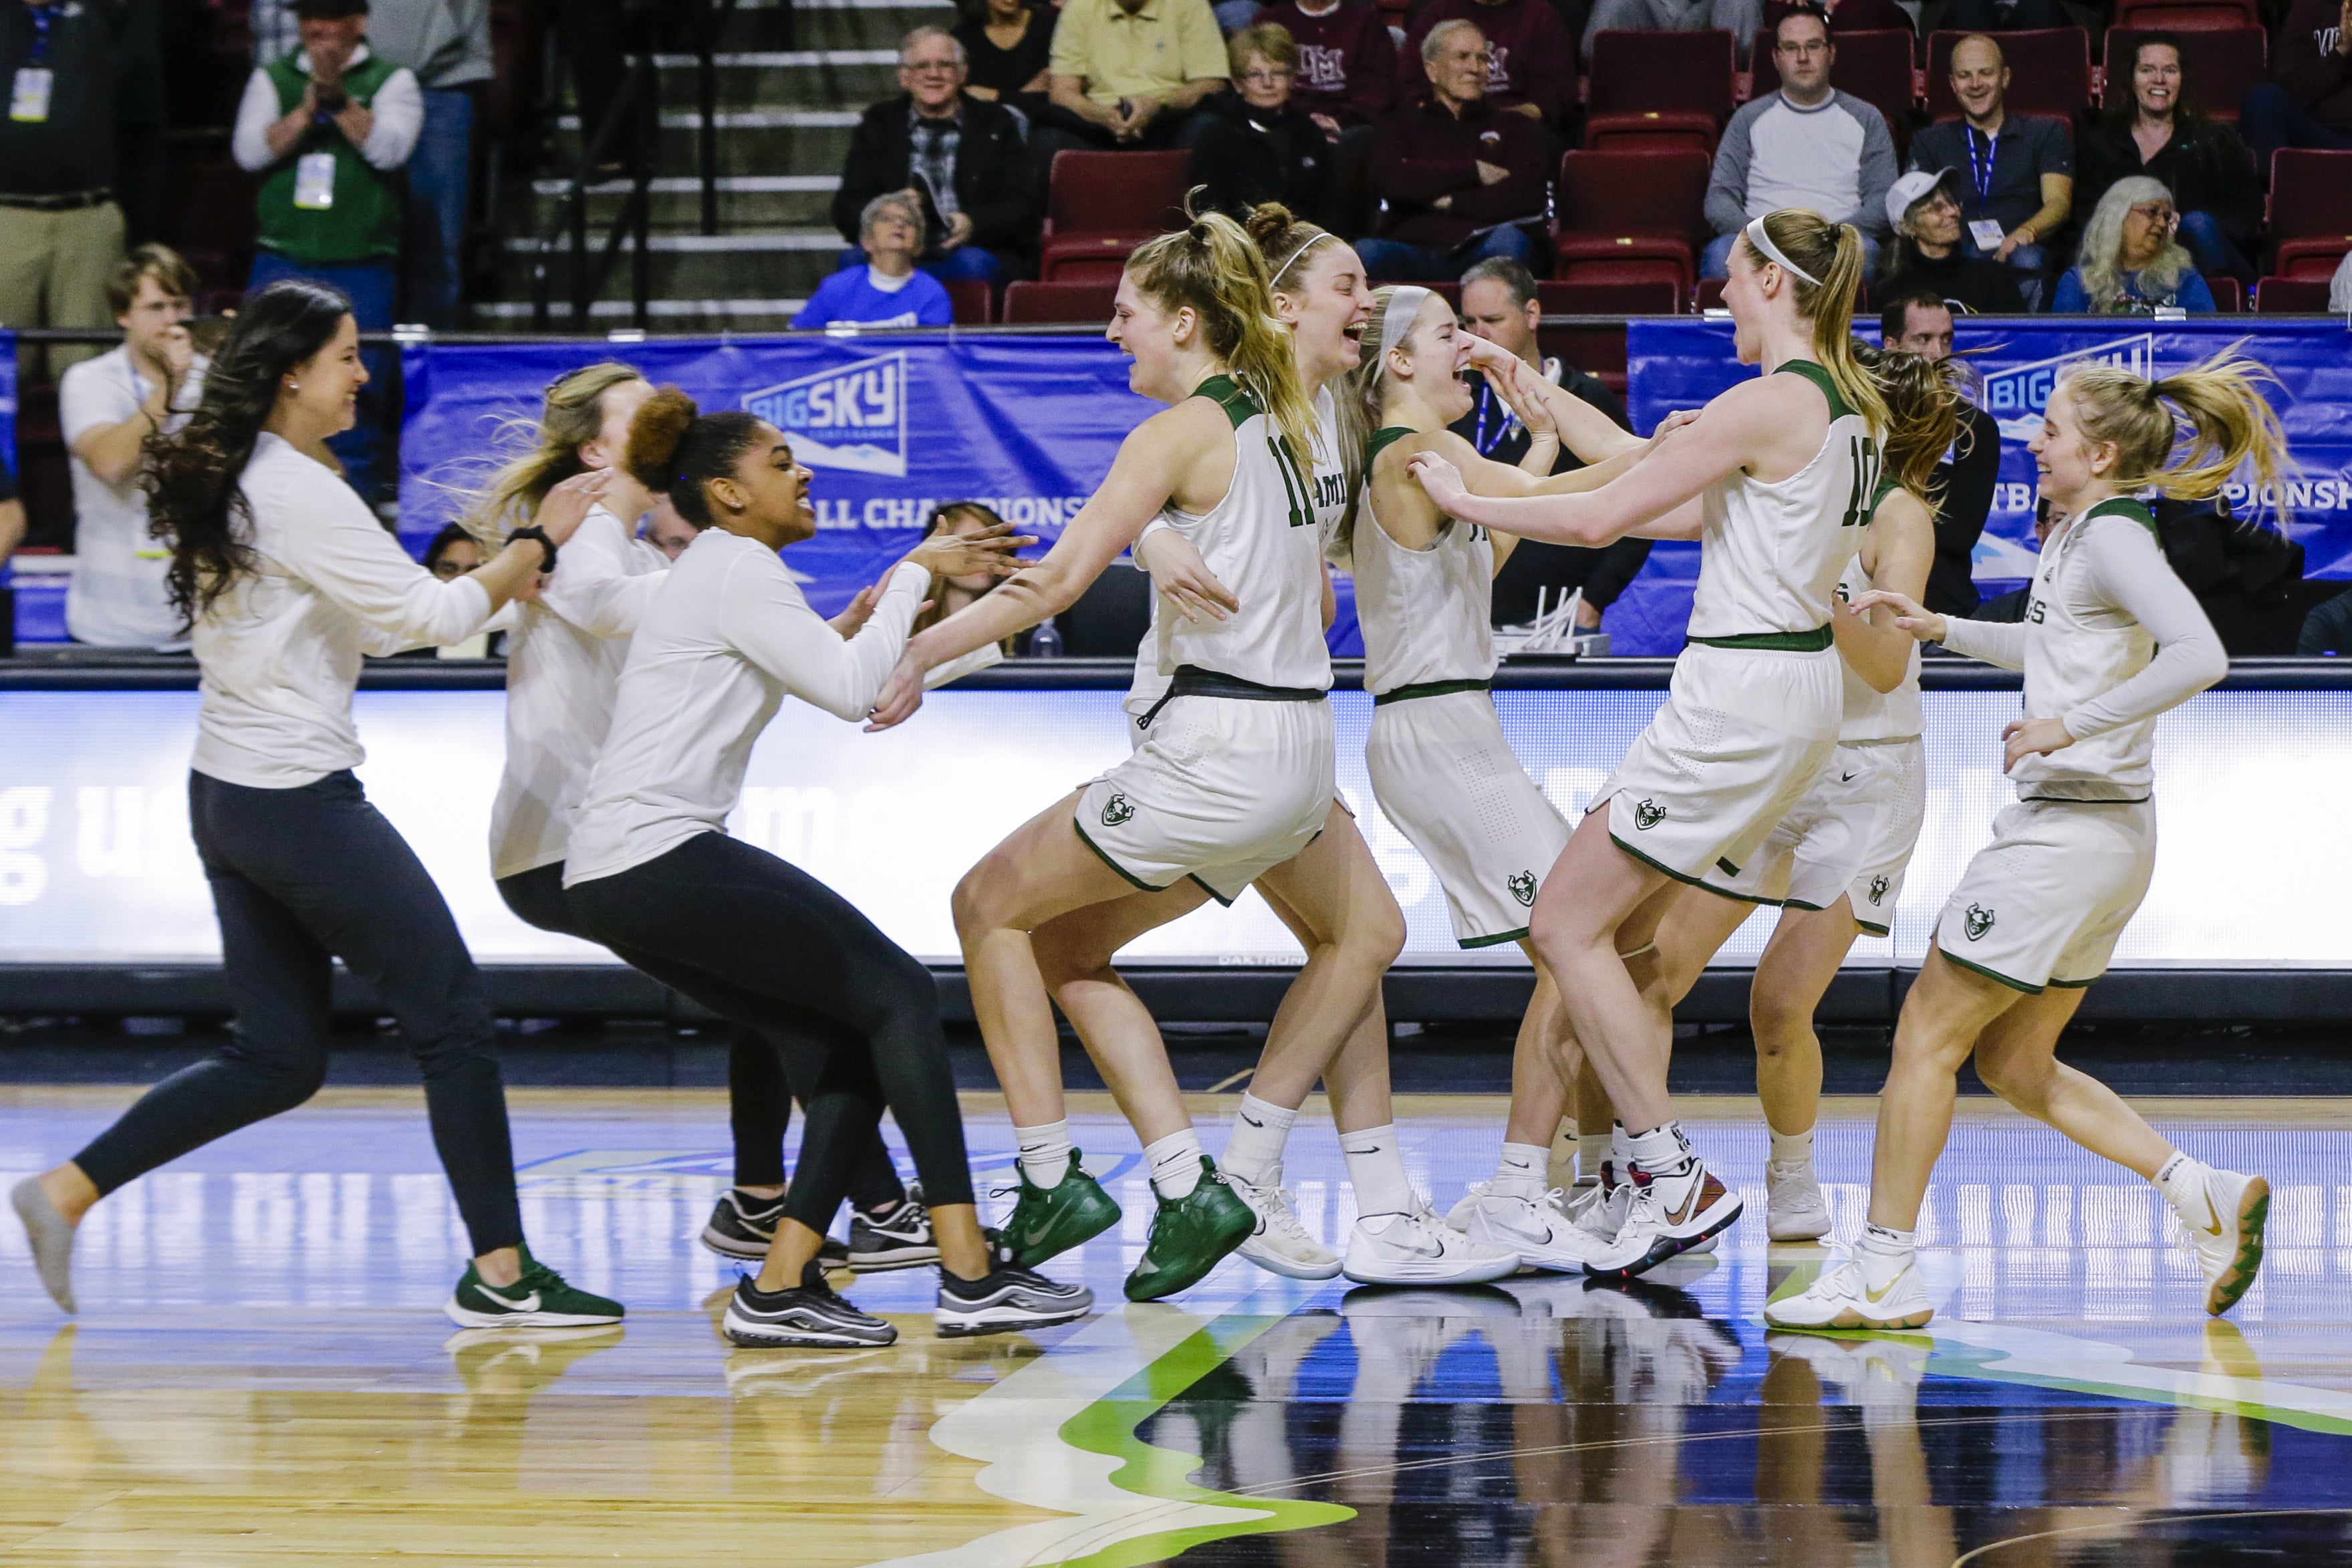 Portland State celebrates their 61-59 win over Eastern Washington in an NCAA college basketball game in the championship of the Big Sky tournament in Boise, Idaho, Friday, March 15, 2019.